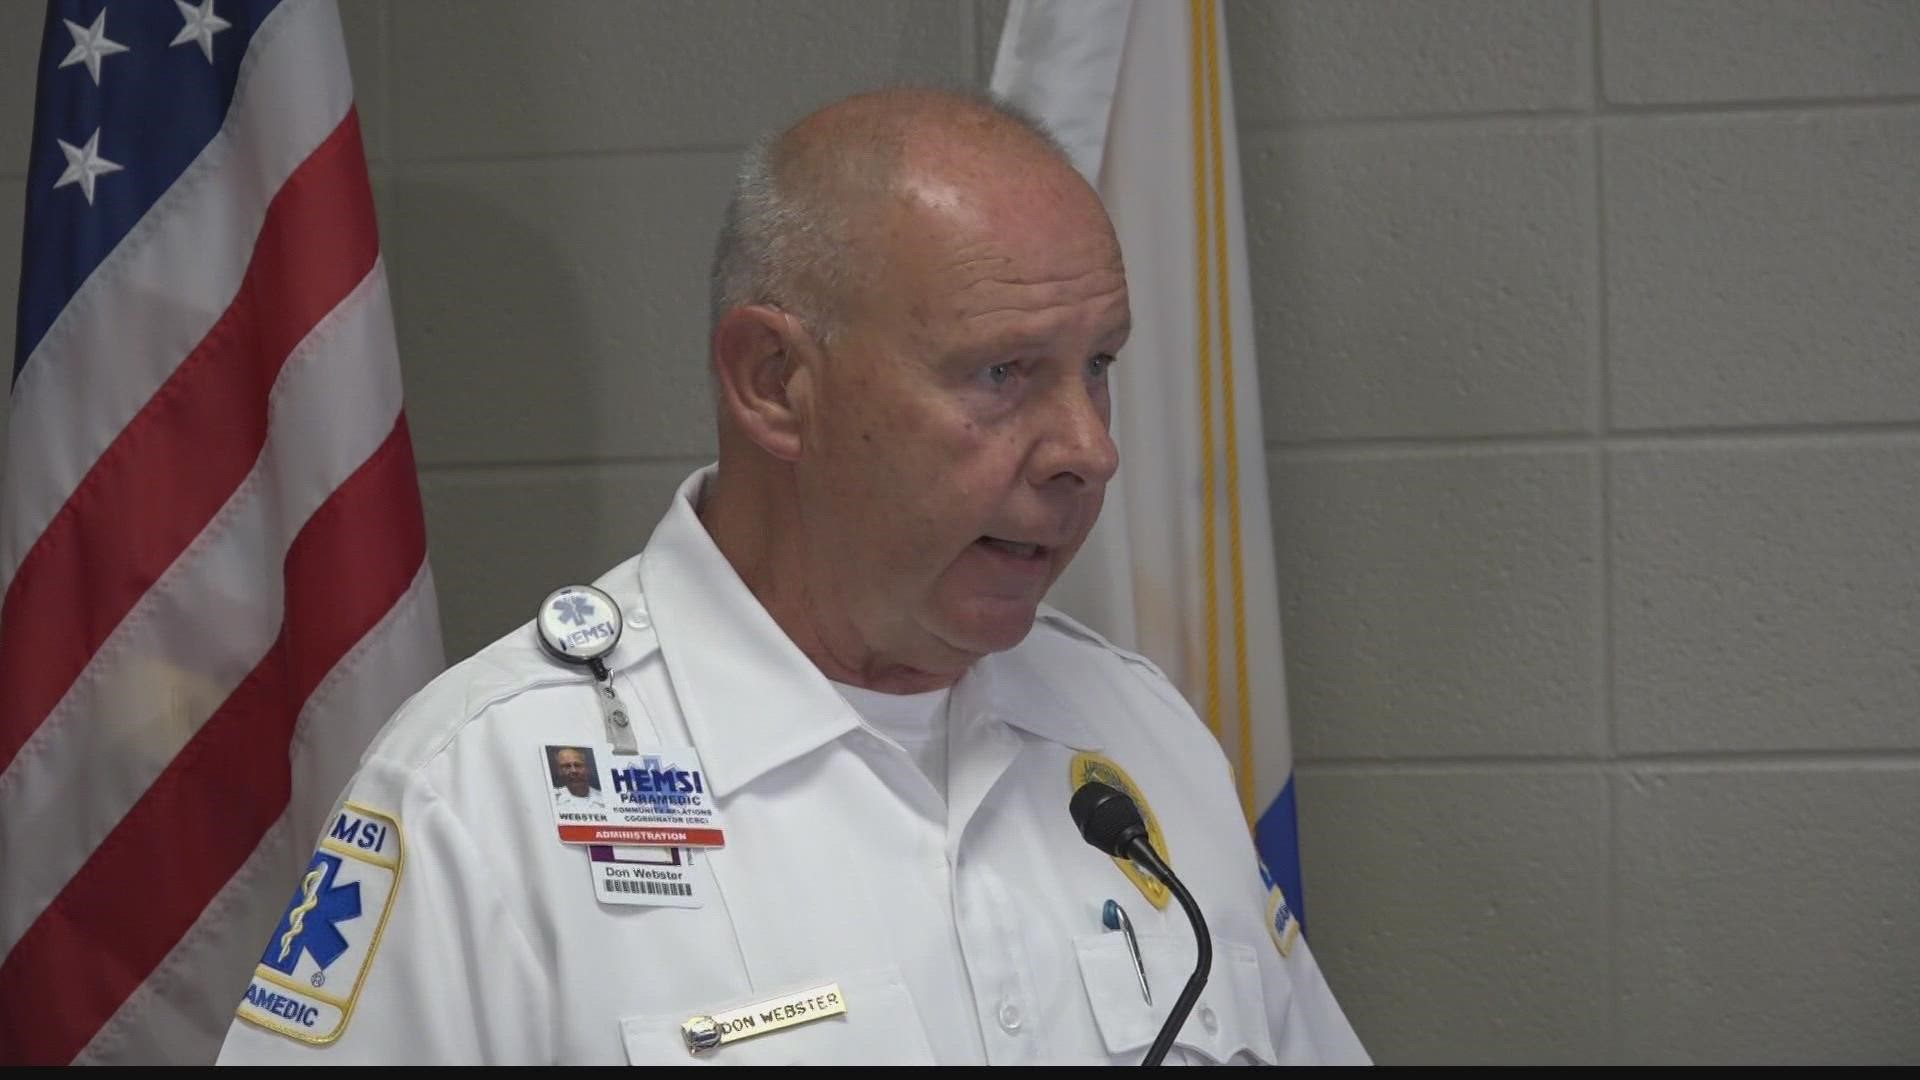 First responders, such as HEMSI- speak on how fentanyl overdoses strain hospitals when they come in contact with someone poisoned by the synthetic opioid.